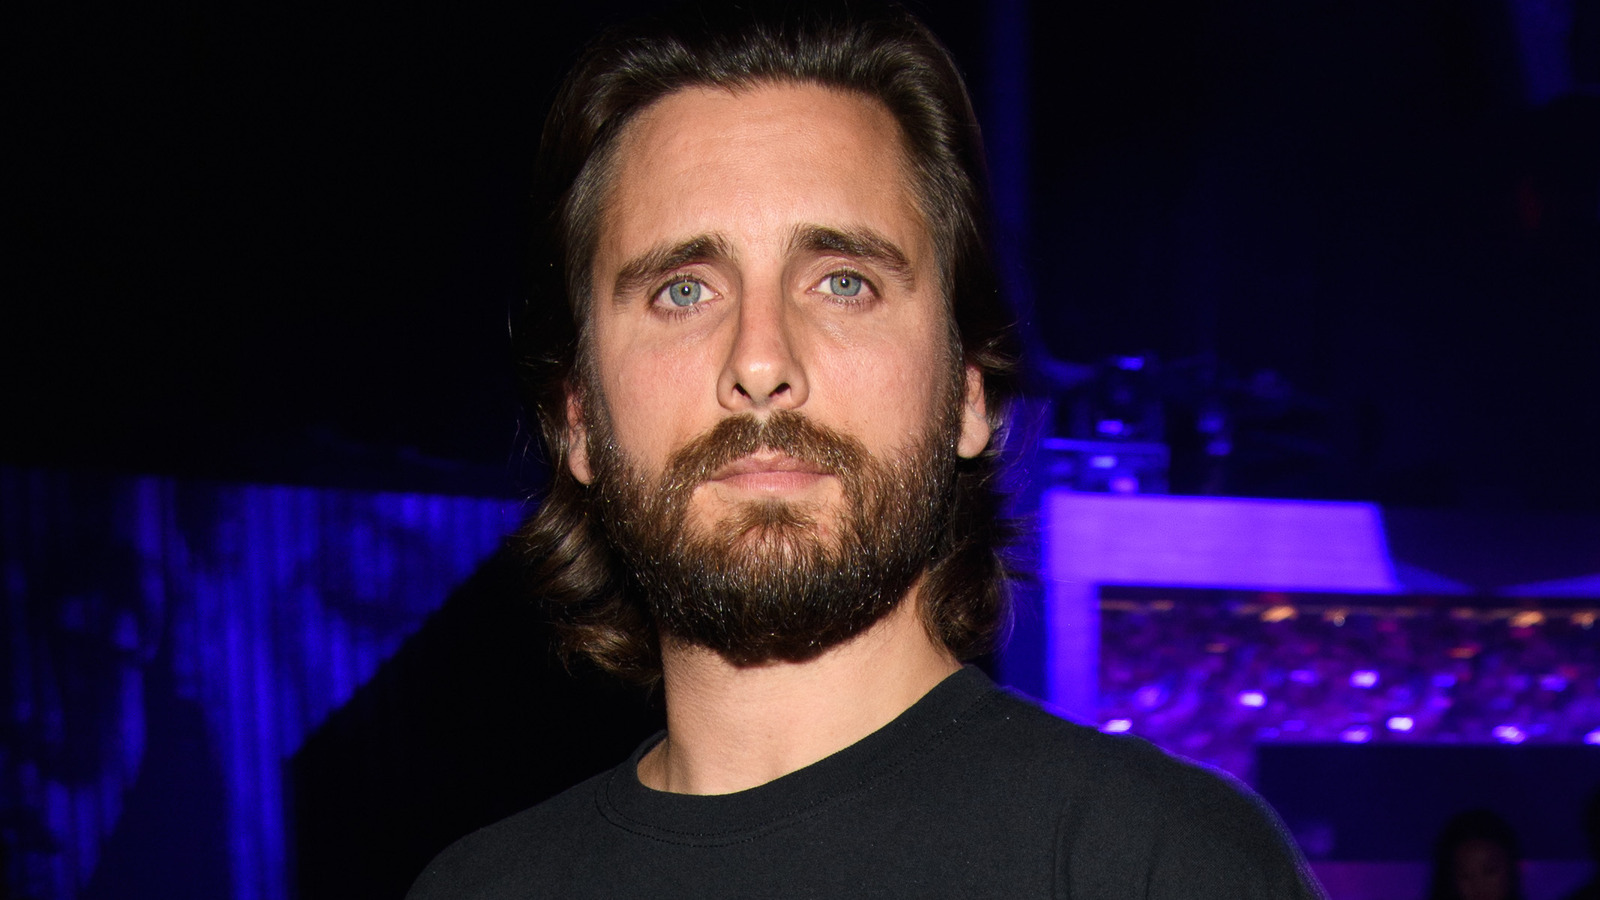 A Deep Dive Into Scott Disick's Dating History - Internewscast Journal